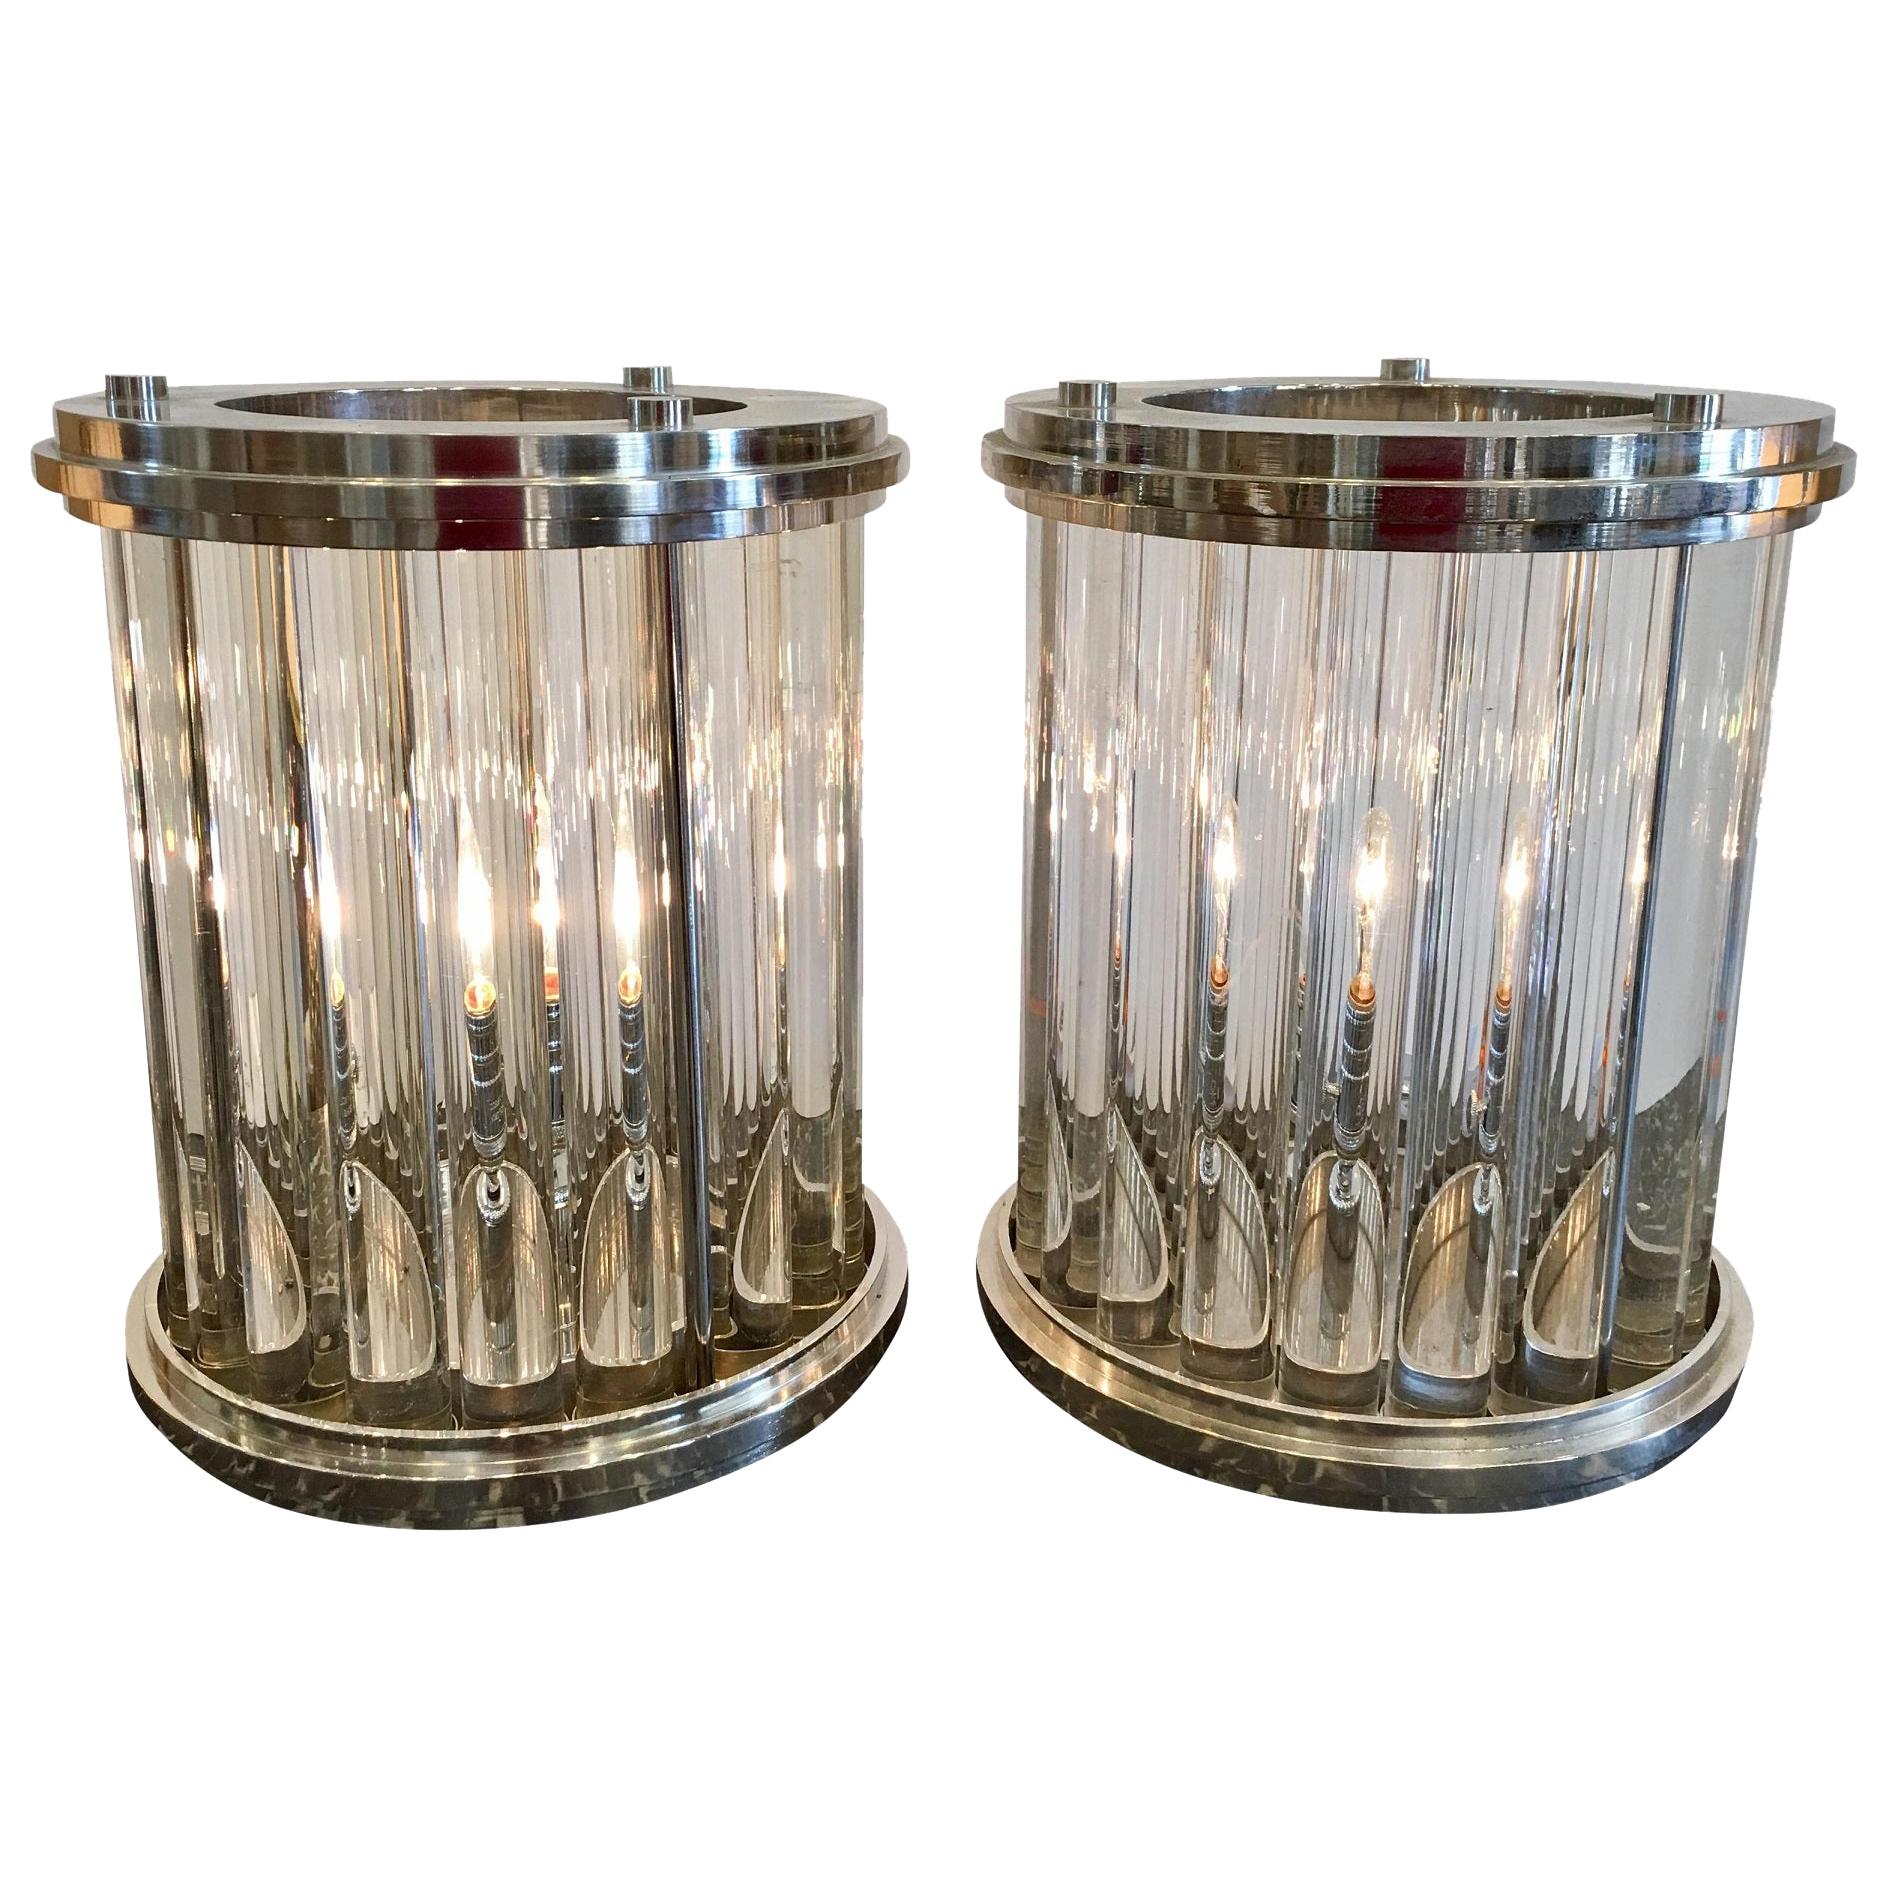 Pair of Art Deco Style Nickel-Plated Glass Rod Modernist Lamps by Randy Esada For Sale